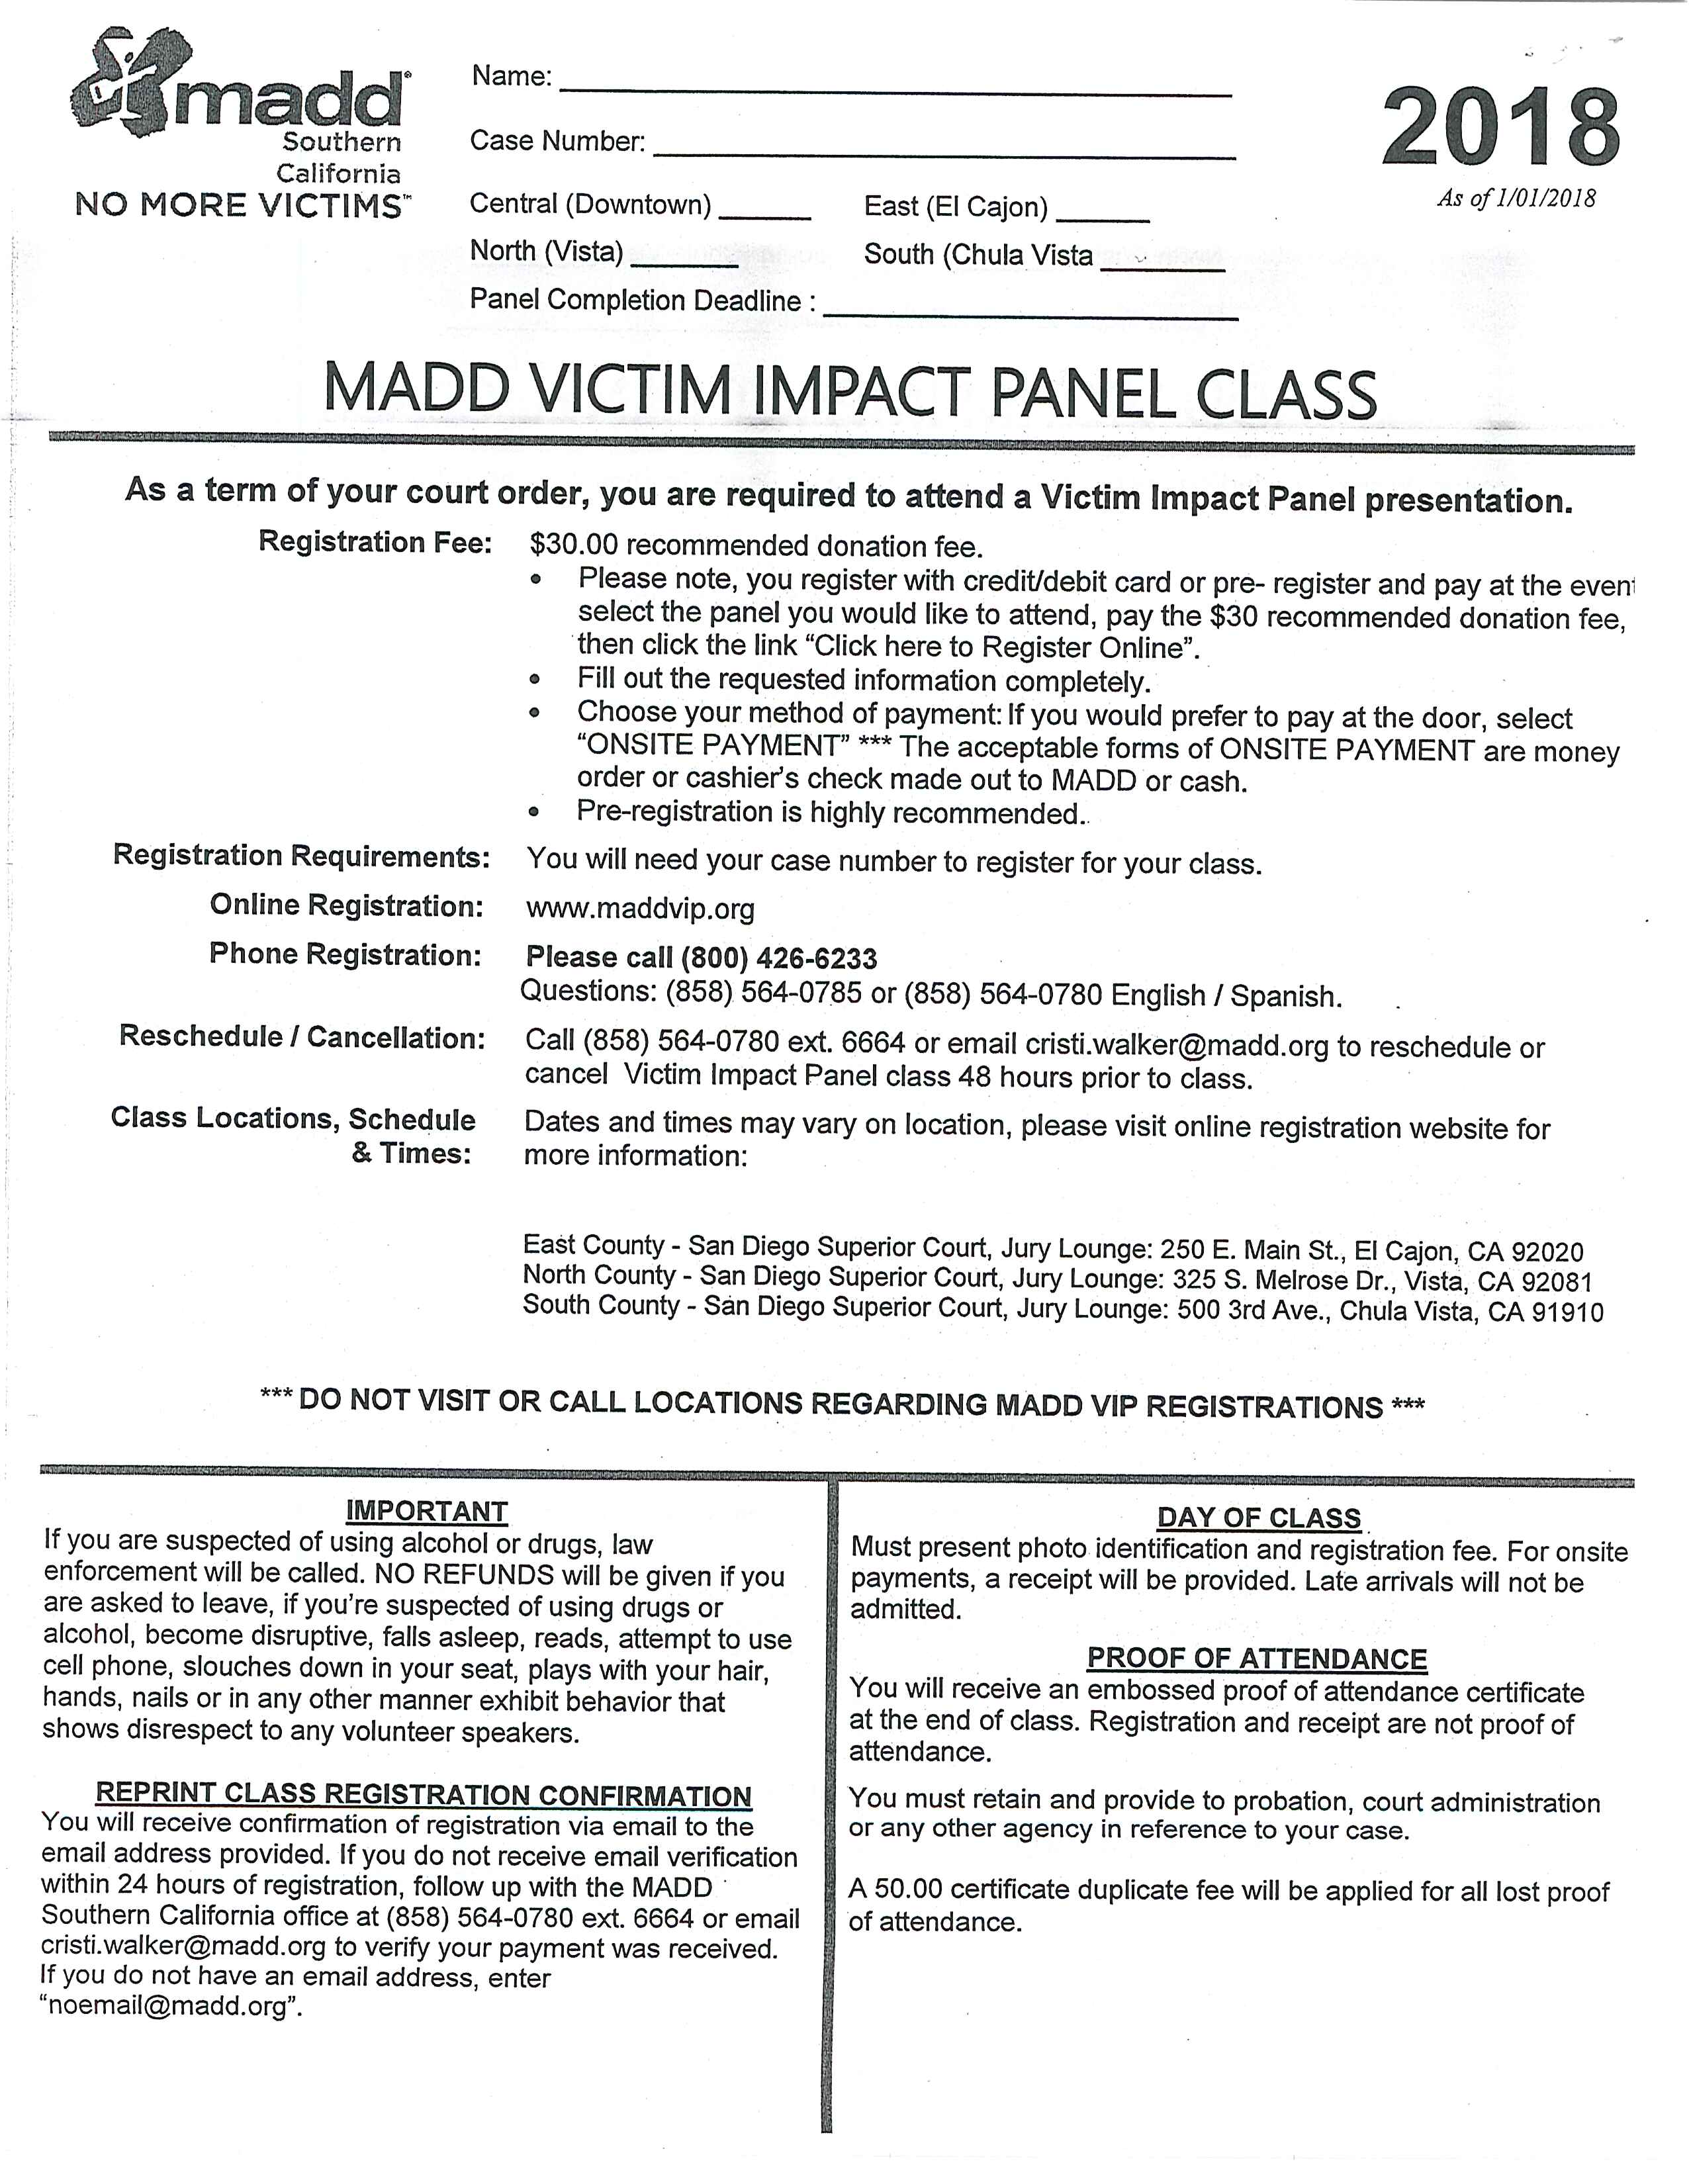 MADD DUI Completion Form